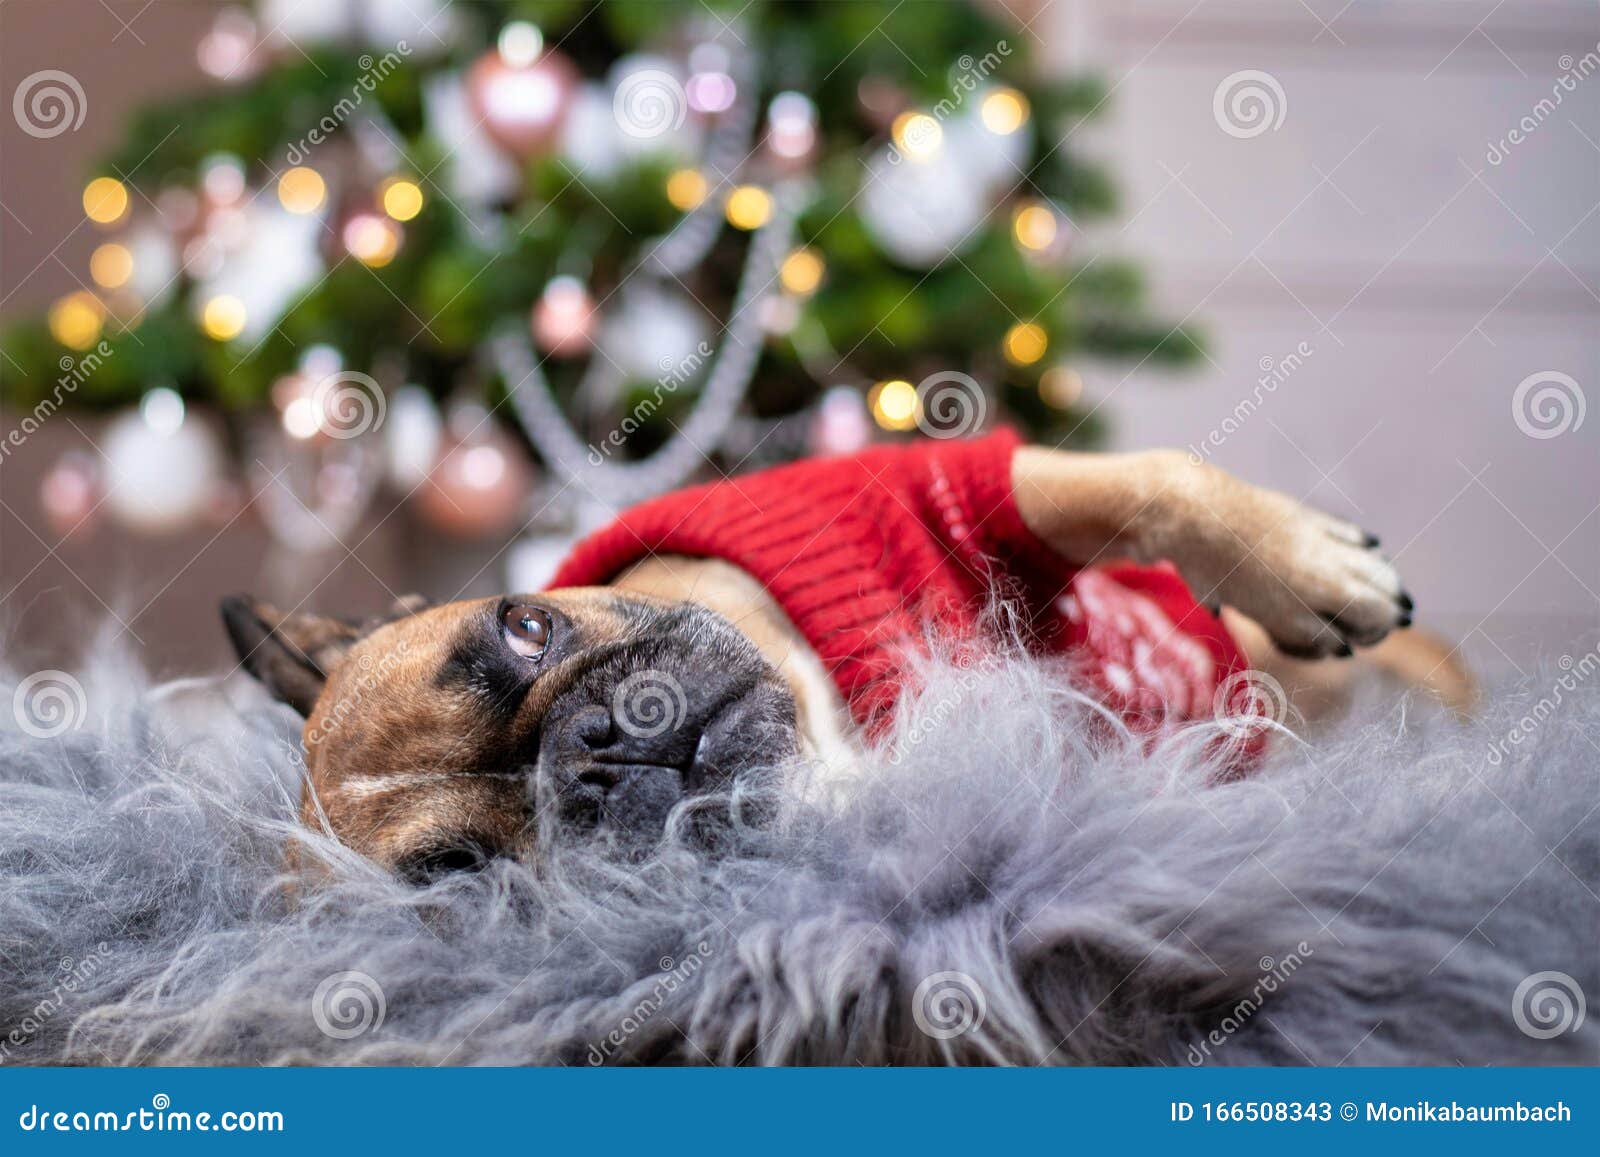 Cute French Bulldog Dog Wearing A Red Knitted Christmas